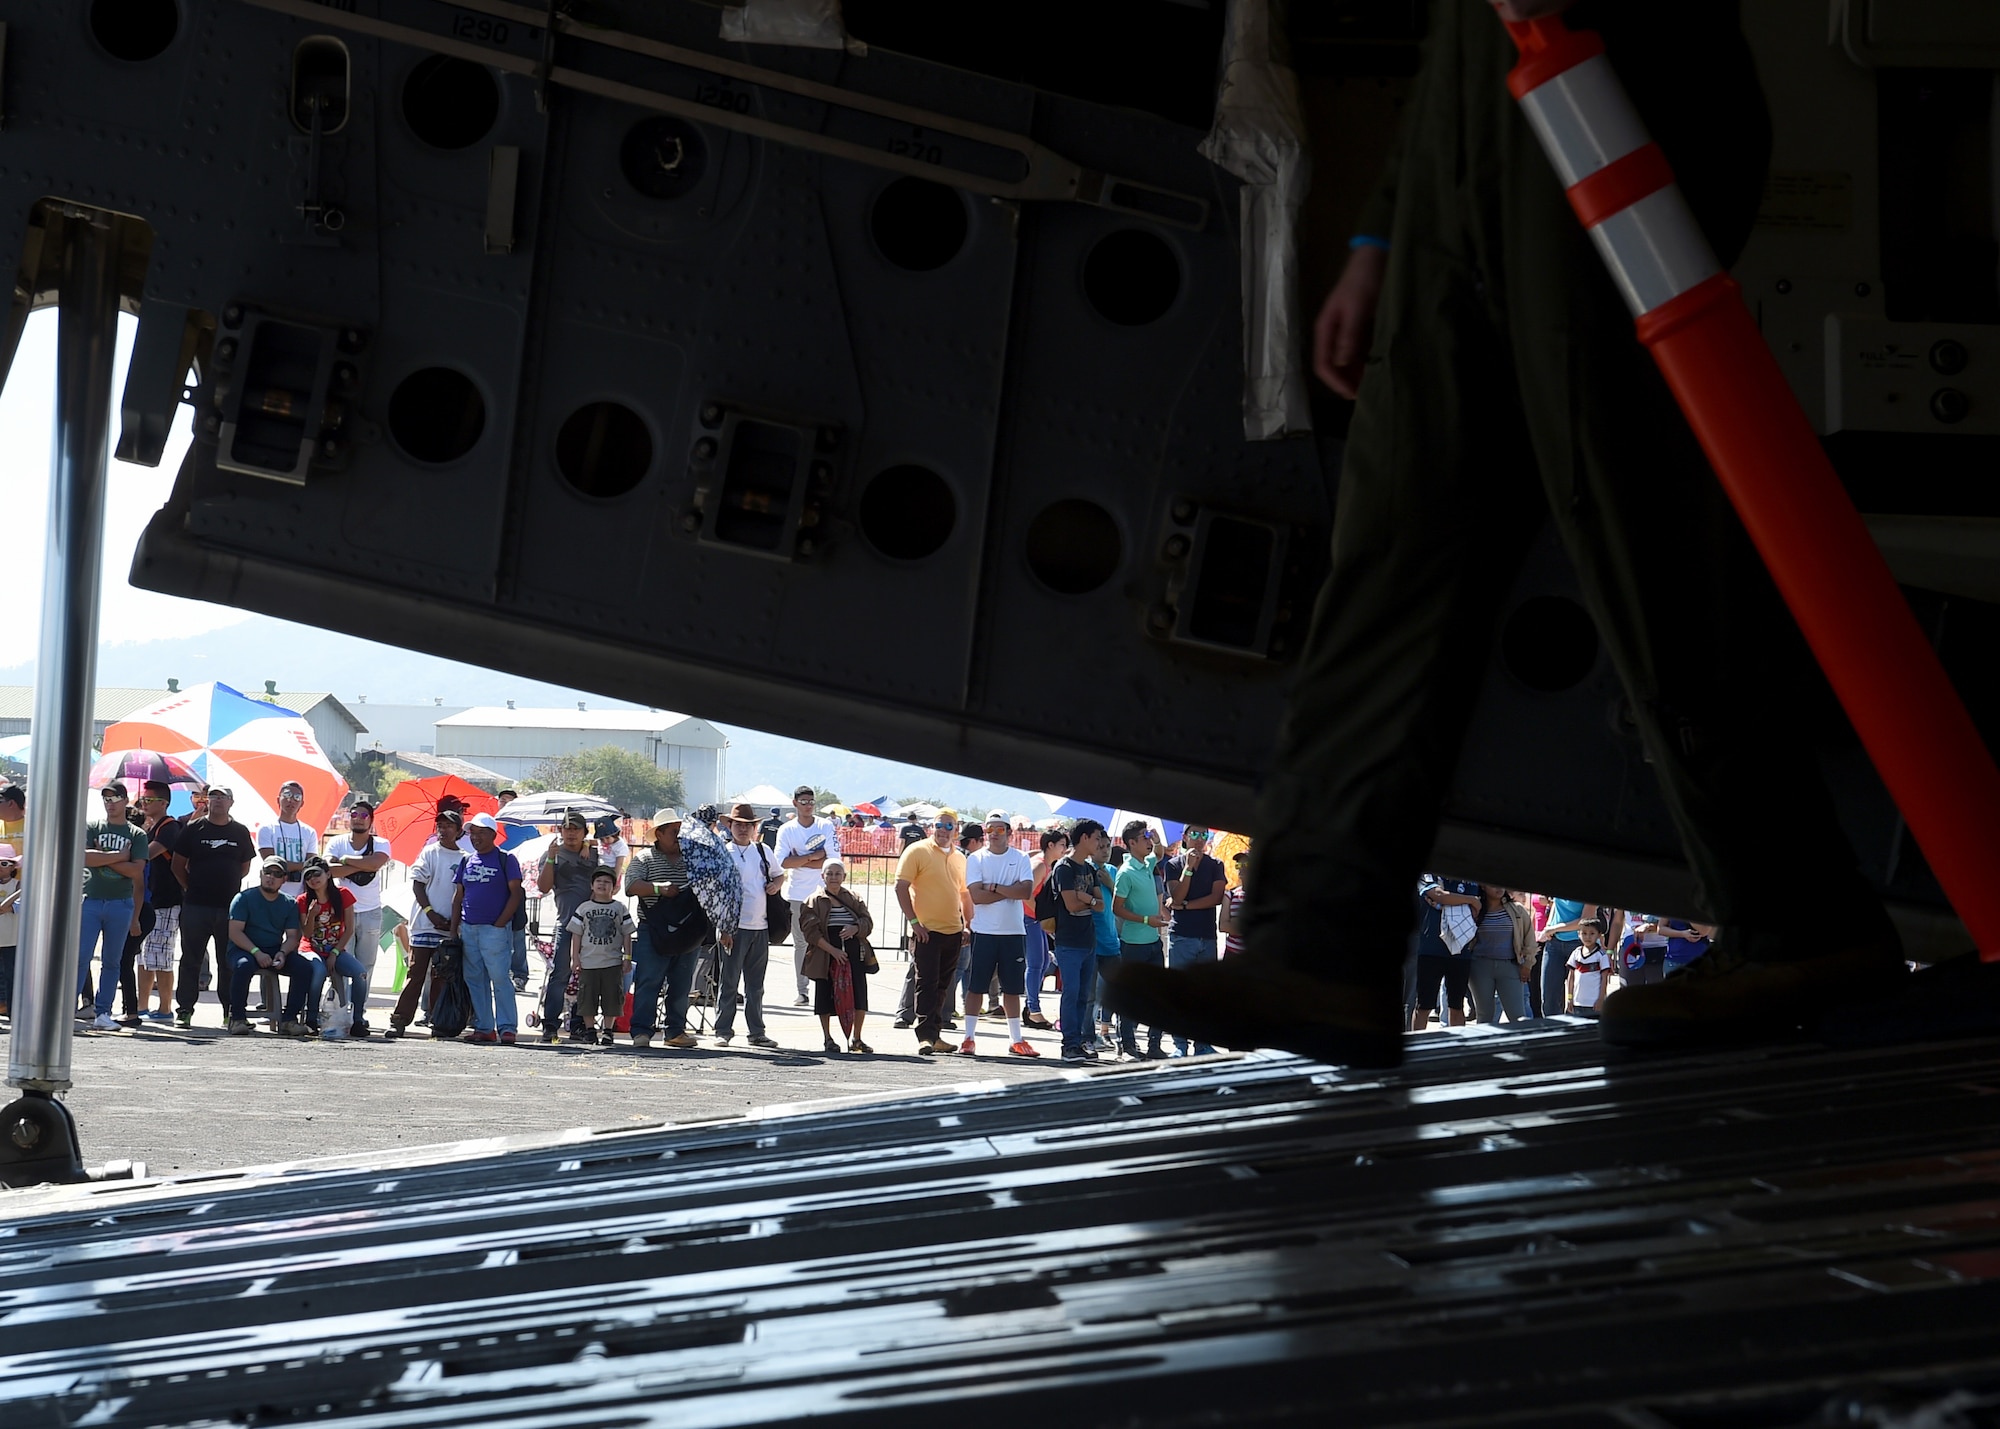 Citizens of El Salvador wait in line to enter a U.S. Air Force C-17 Globemaster III cargo aircraft, 58th Airlift Squadron at Ilopango International Airport in San Salvador, El Savador, Jan. 31, during the 2016 Ilopango Airshow. The C-17 was sent from Altus Air Force Base, Okla., to foster relationships between the U.S. and El Salvador. The aircraft was setup as a static display for the attendees to view and learn about some of its capabilities. (U.S. Air Force photo by Senior Airman Franklin R. Ramos/Released)